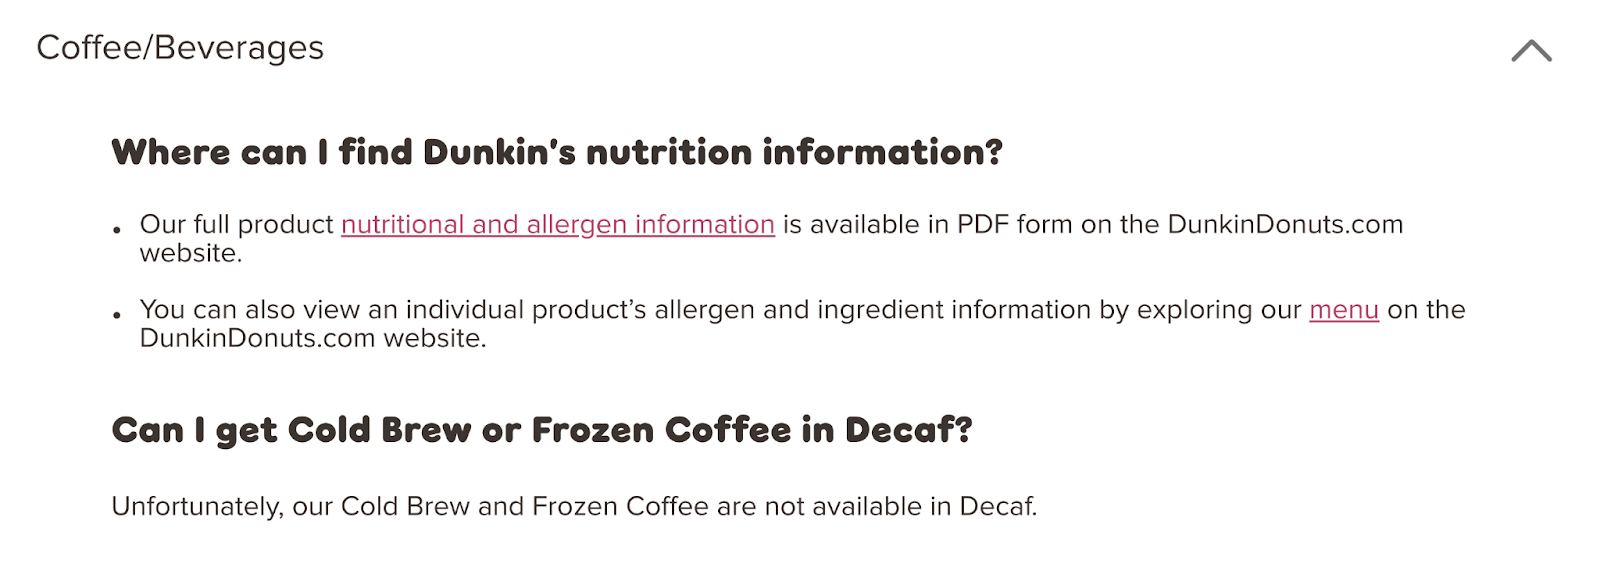  Dunkin responds to "Can I get   acold  brew oregon  frozen java  successful  decaf?" by saying "Unfortunately, our acold  brew and frozen java  are not disposable  successful  decaf"